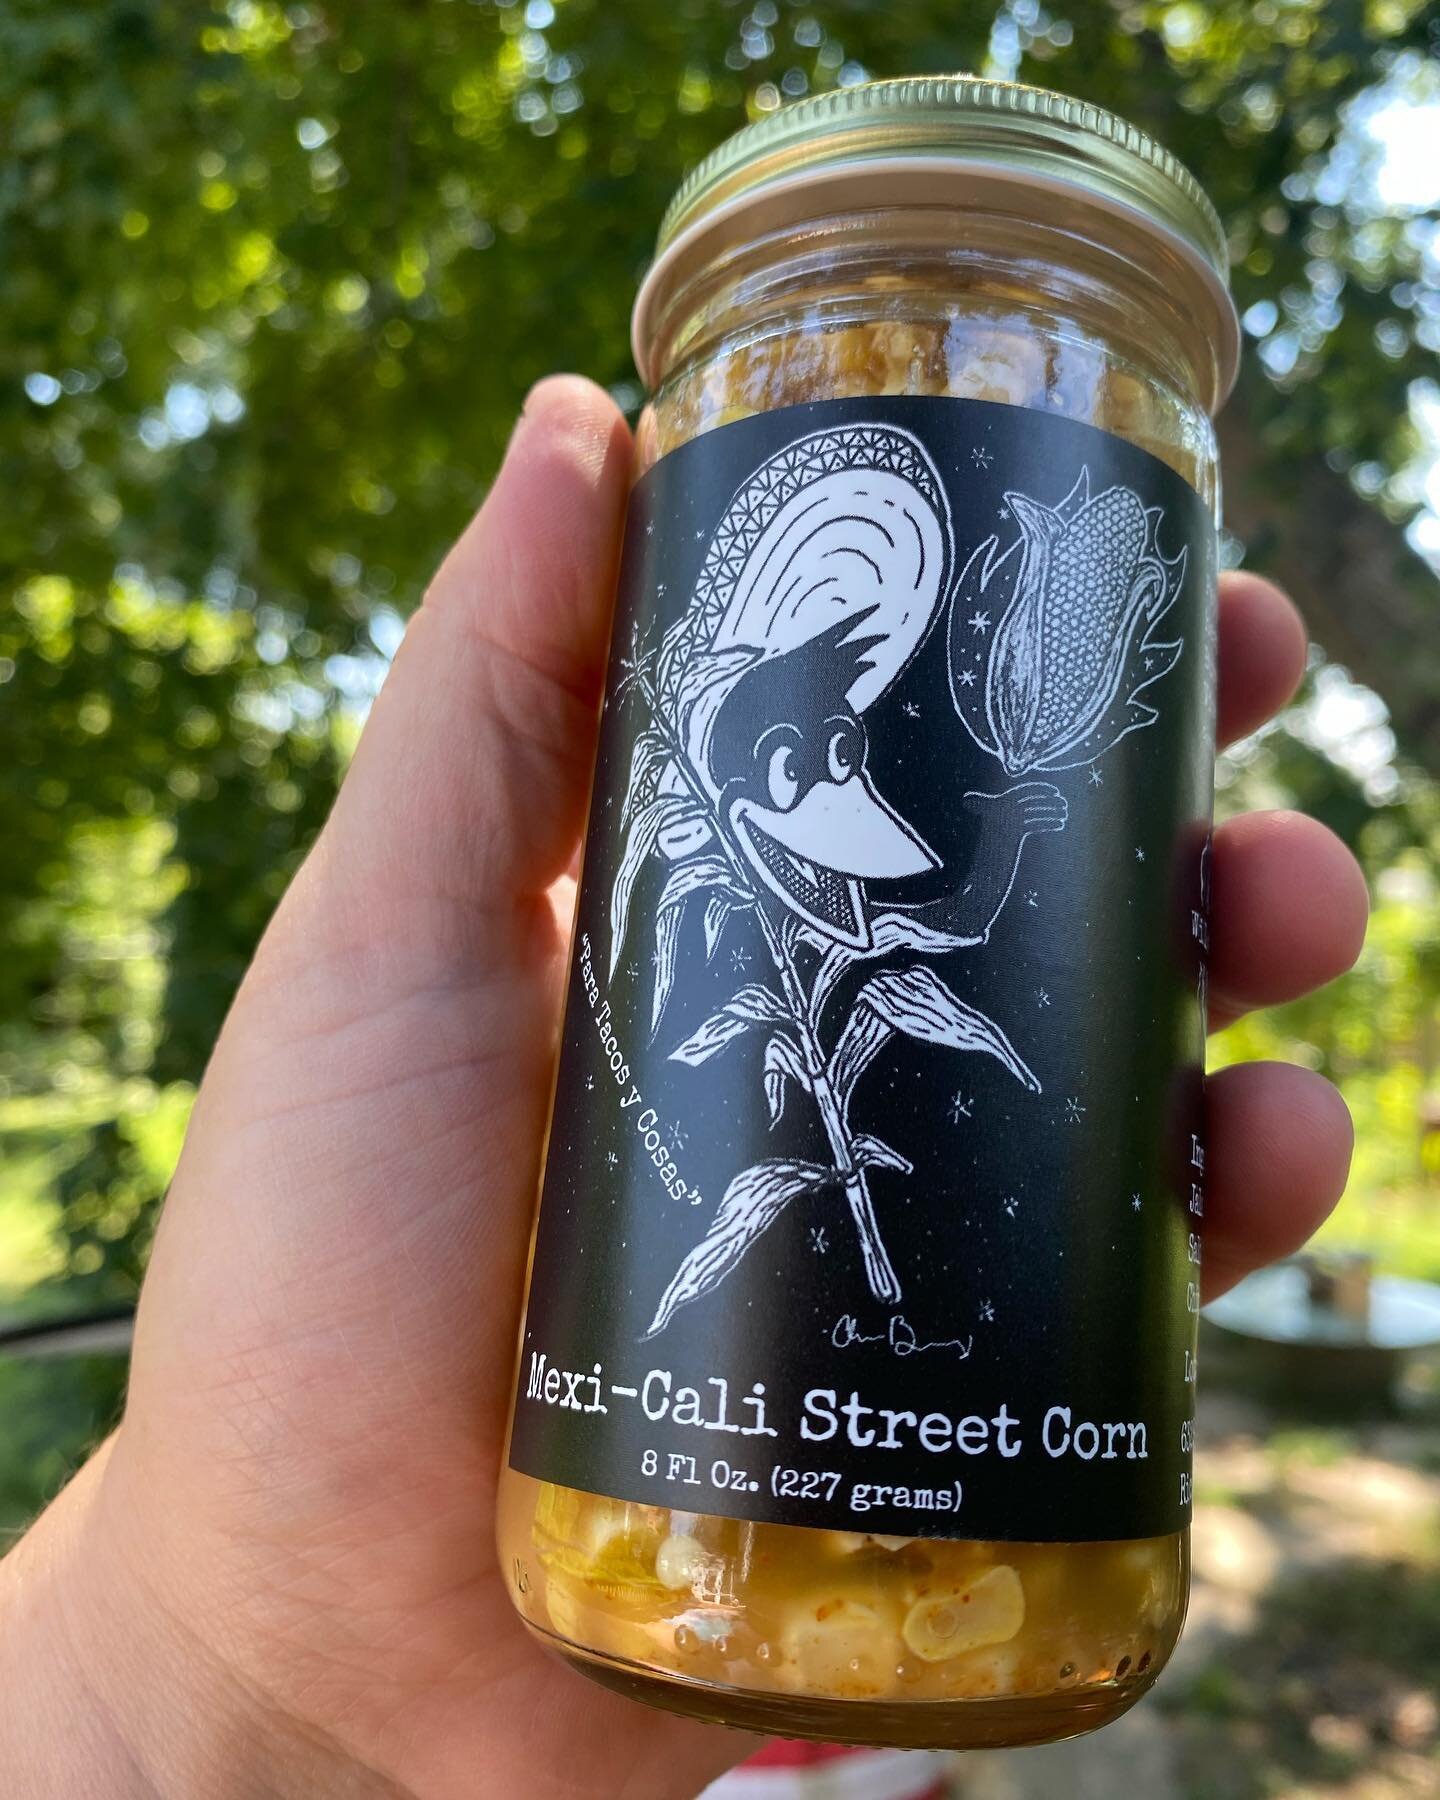 Here she is! A lovely Corn &amp; Jalape&ntilde;o topping we almost forgot about! Street Corn! 

This Throwback is so good you can&rsquo;t stop eating it! Available only at our farmers markets. Come grab a bottle and see what the buzz is about. 

The 